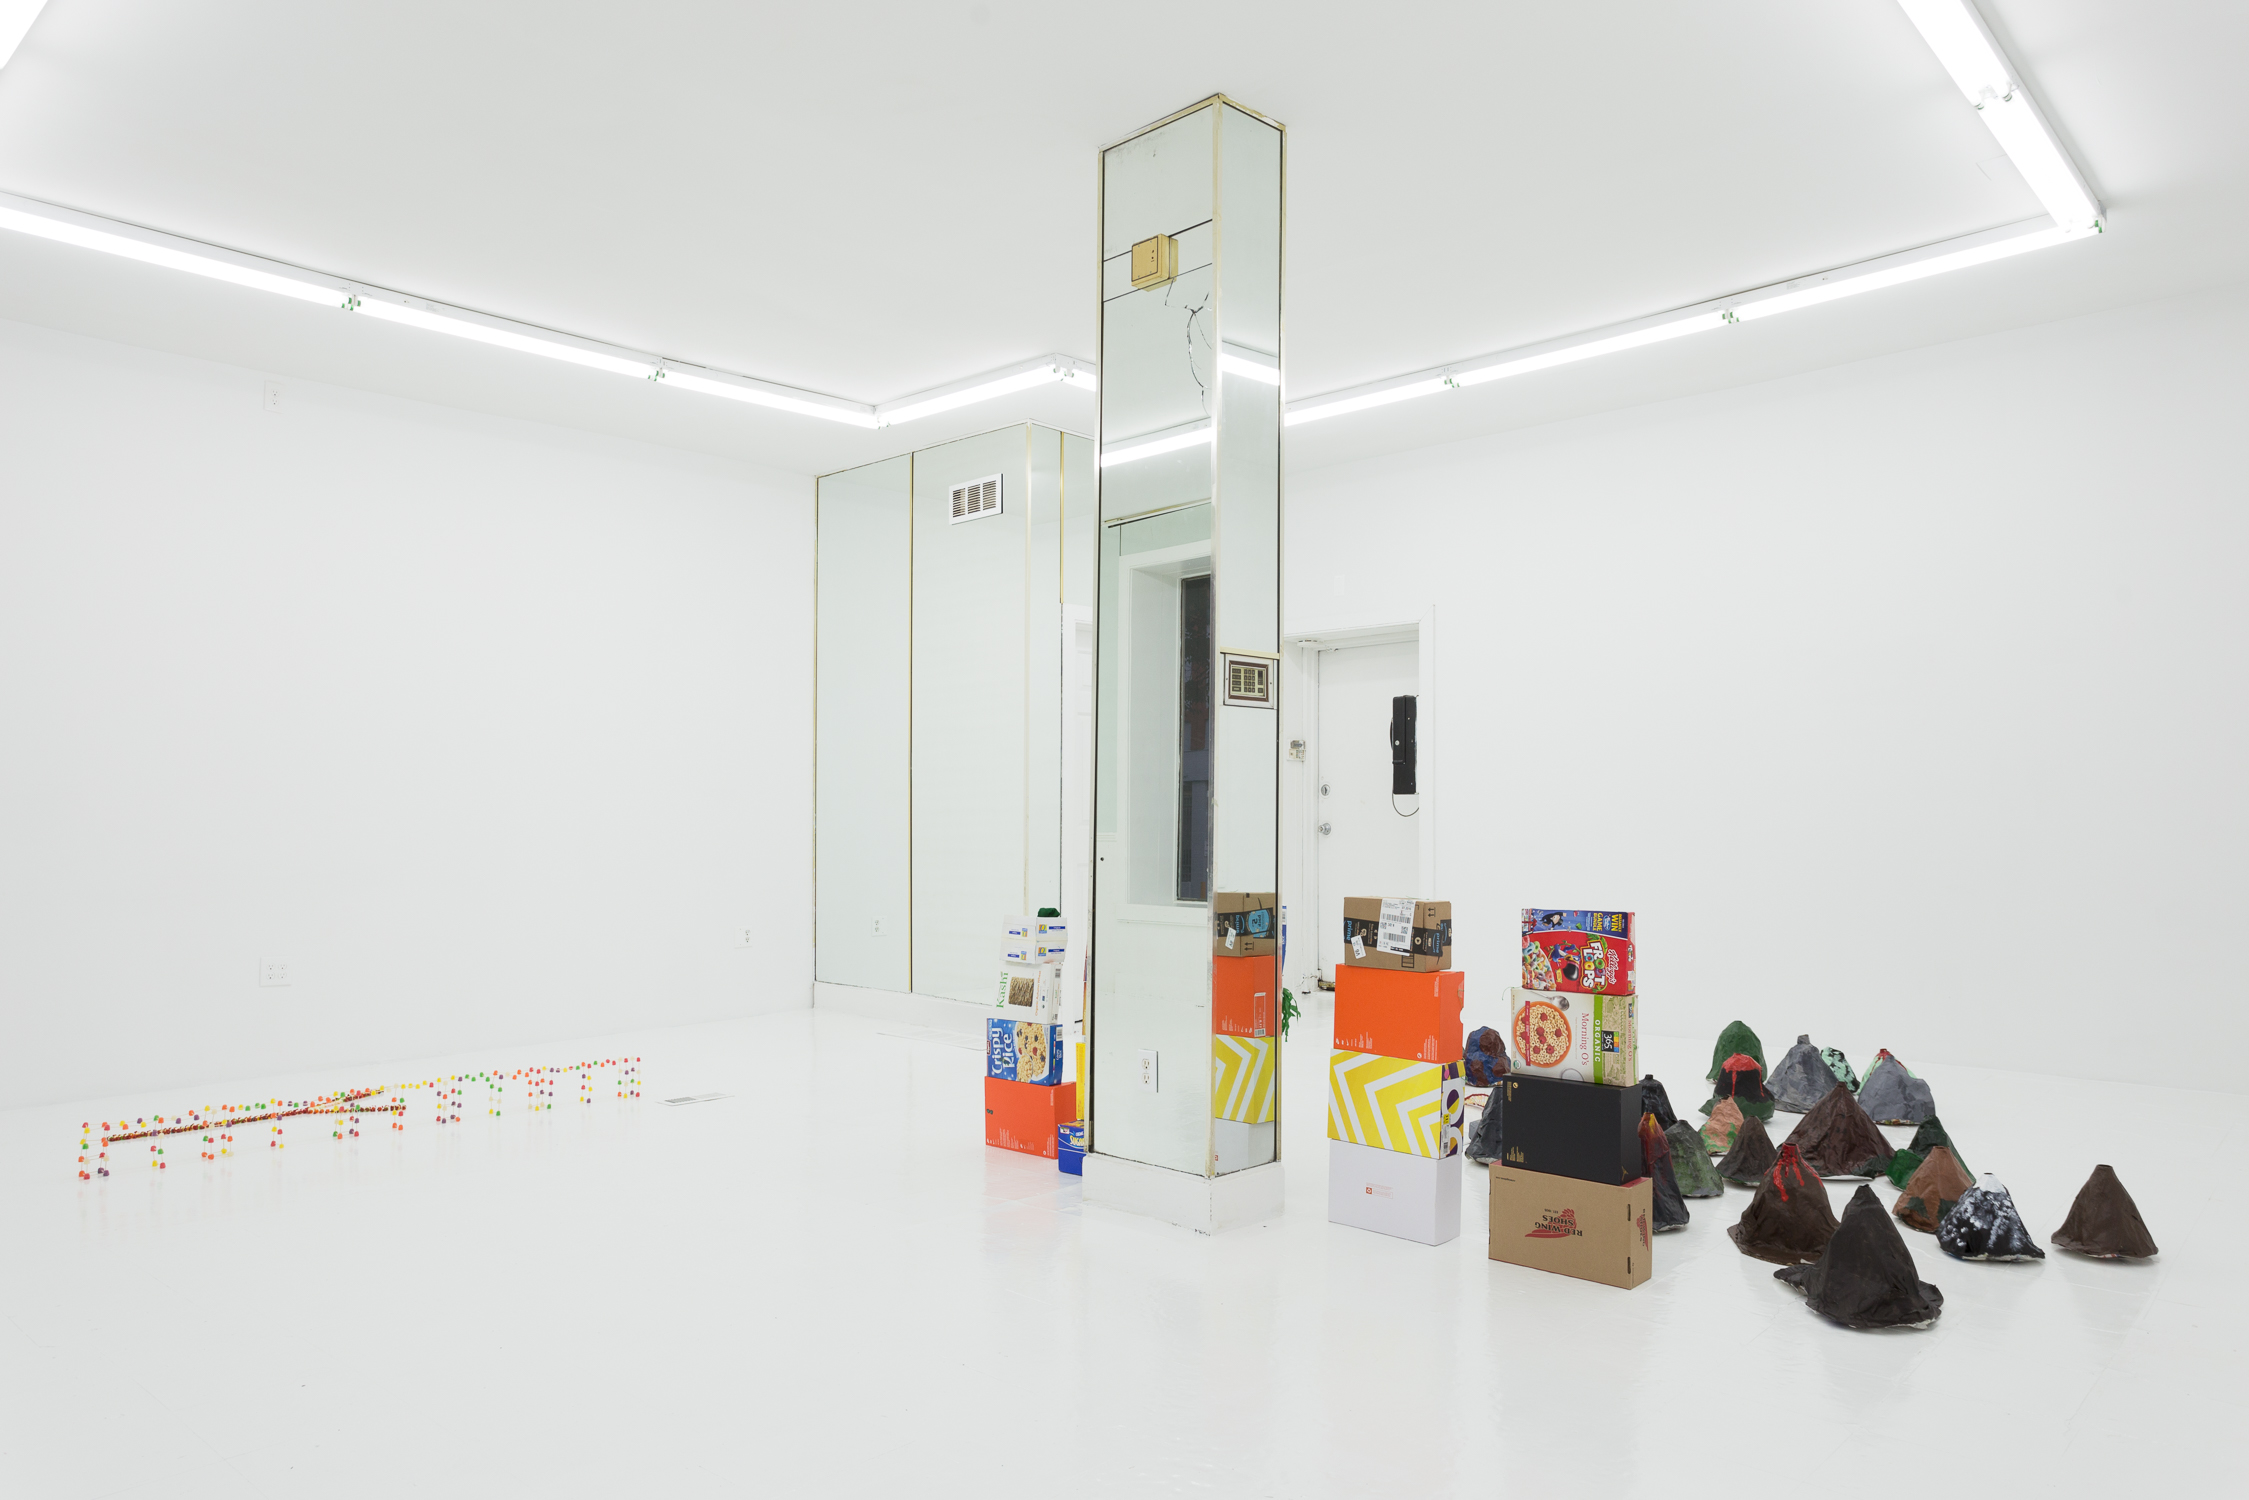 Candy sculptures on the left side of the room, cardboard boxes on the right, separated by column